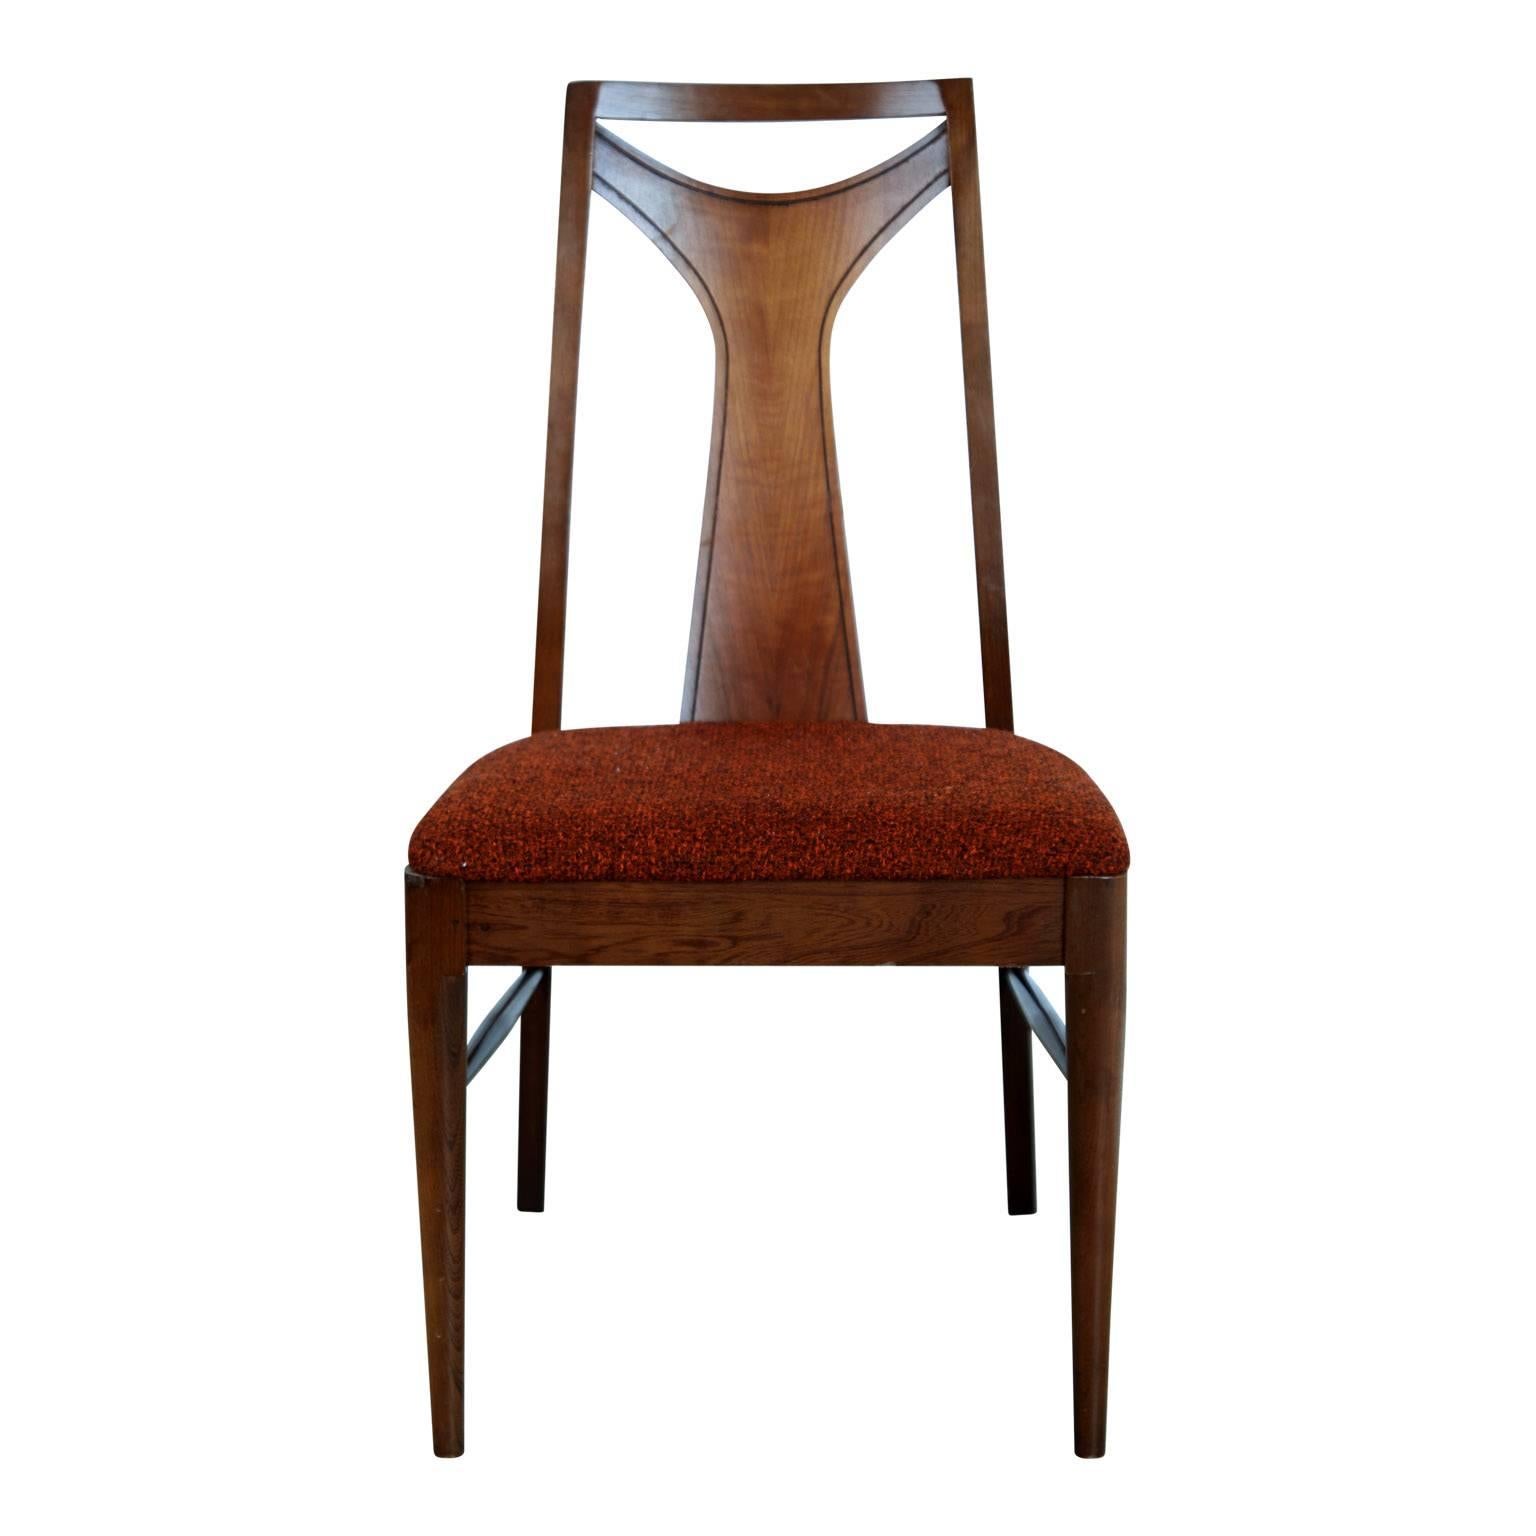 Excellent candidate for reupholstery, this set of dining chairs from the Saga collection by Broyhill and often attributed to the Brasilia collection by Oscar Niemeyer for Broyhill Premiere. This set of six (6) chairs includes four (4) side chairs